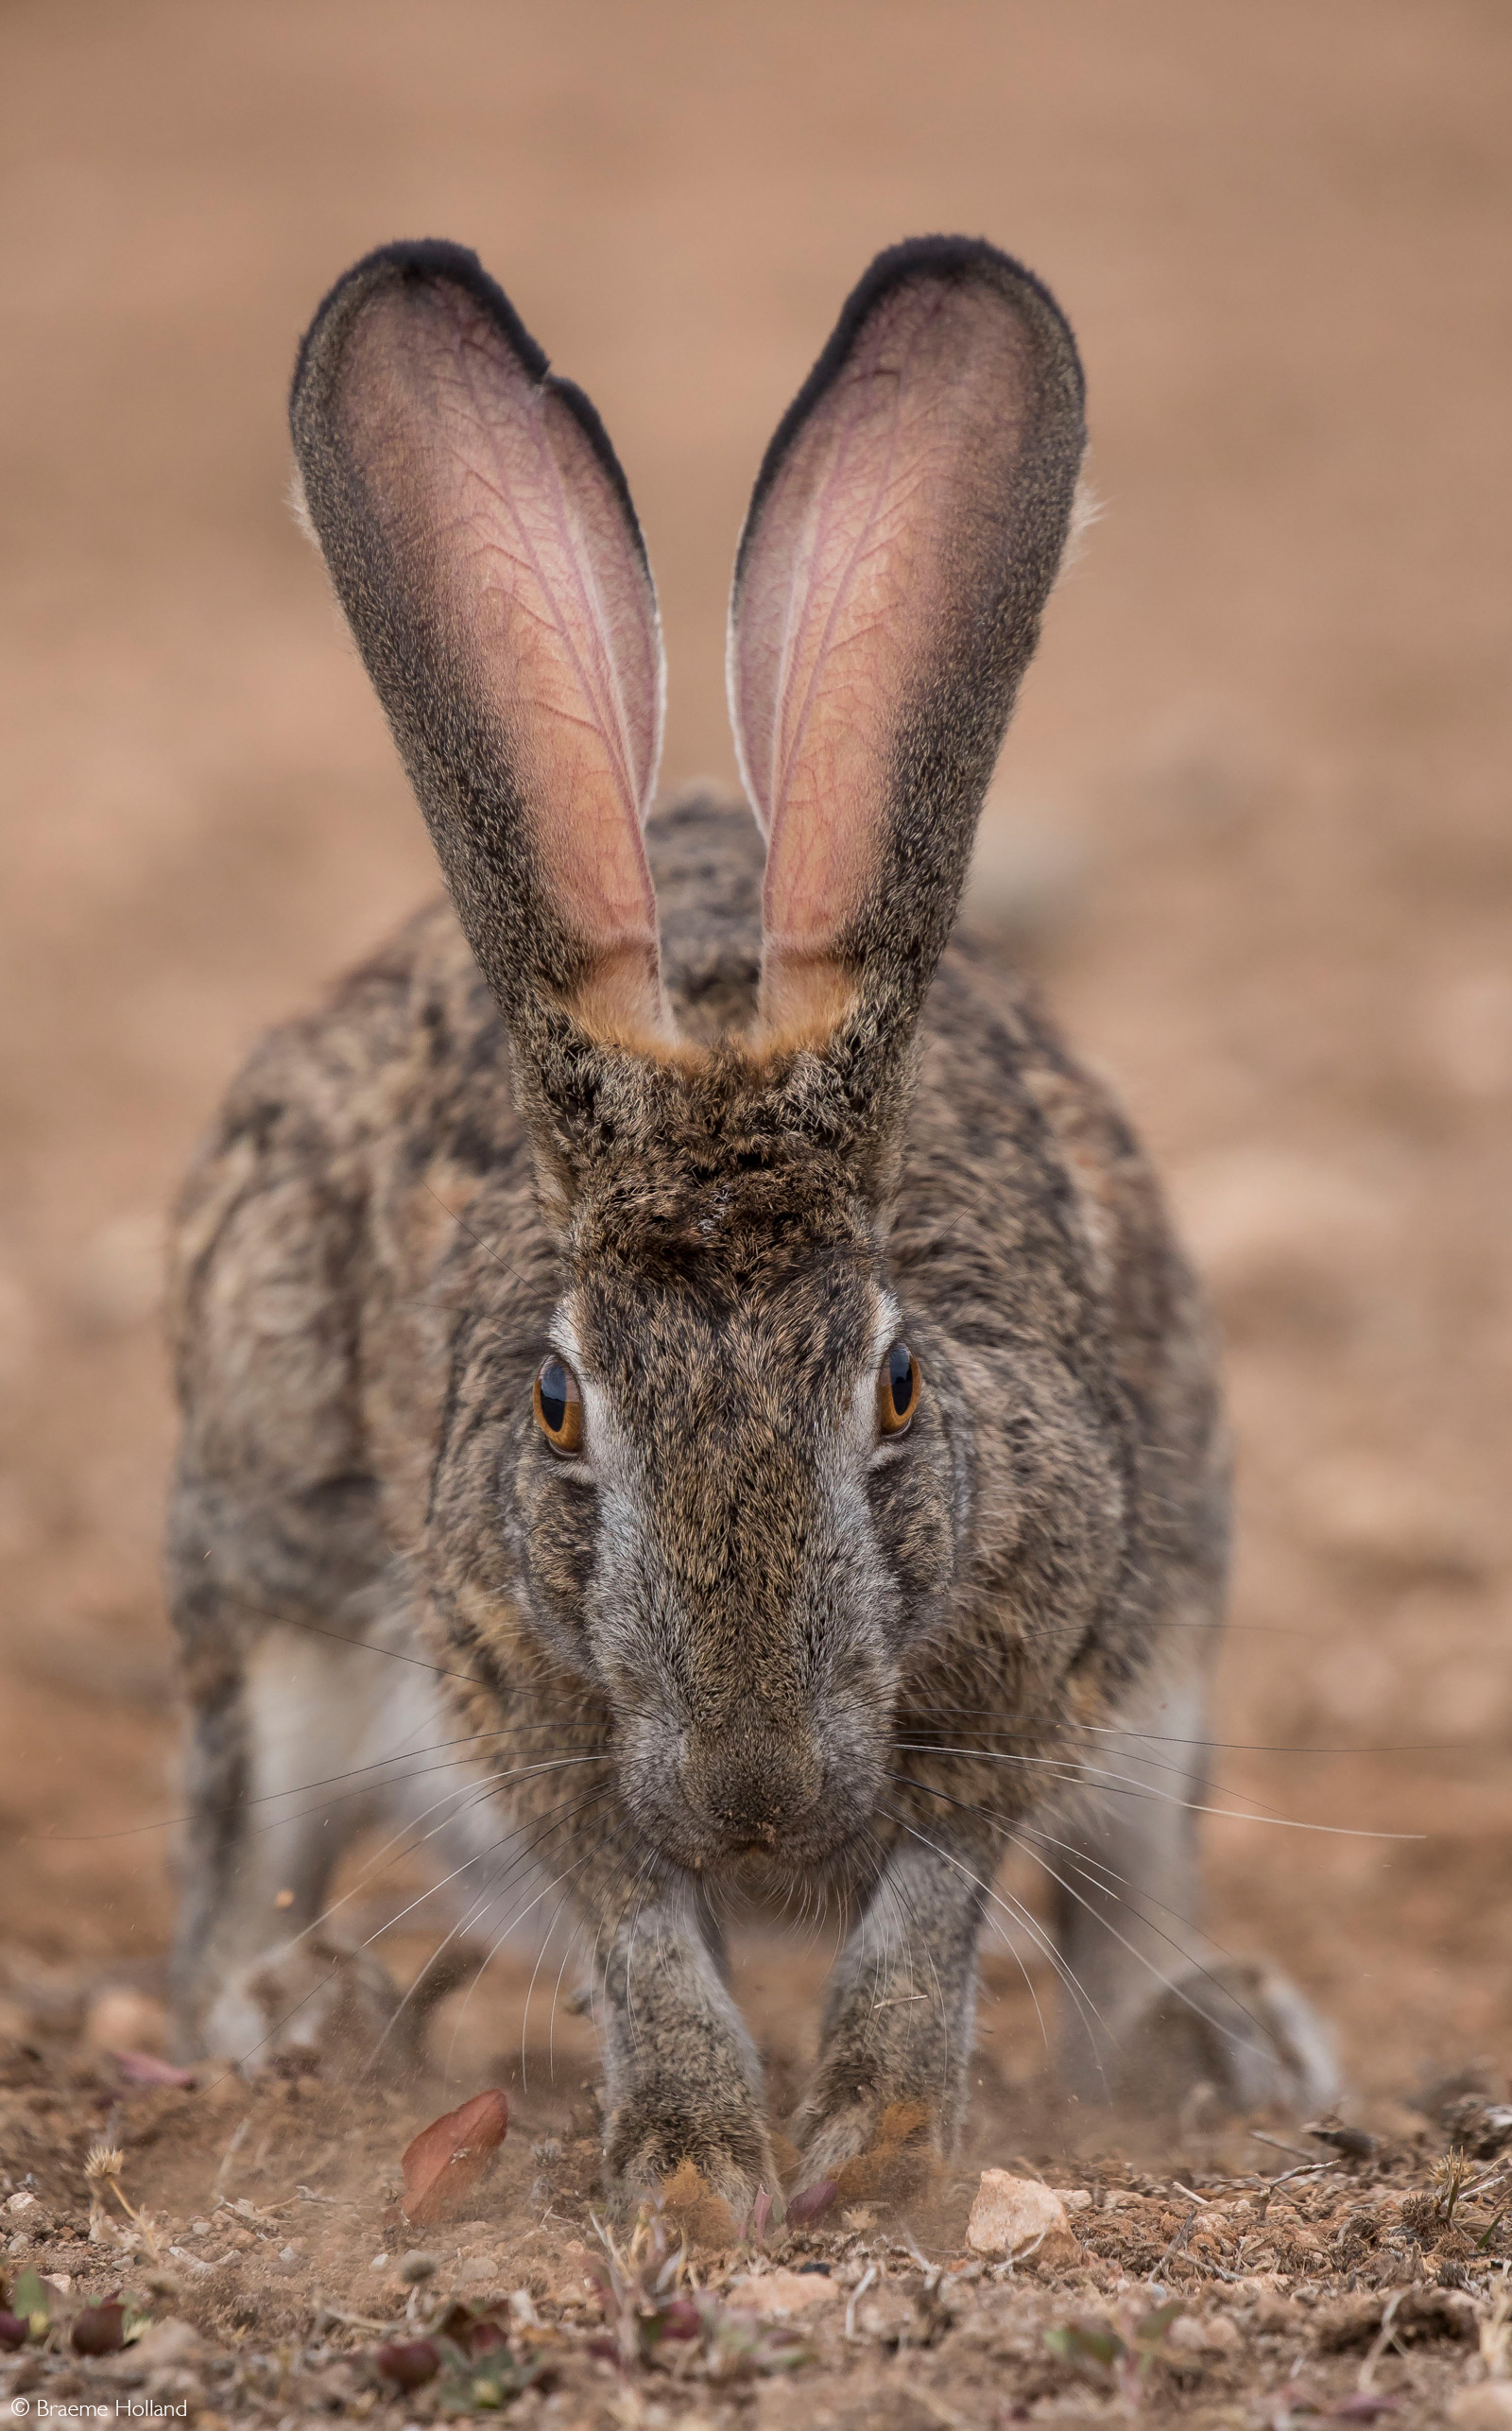 Eye to eye with a scrub hare. Addo Elephant National Park, South Africa © Braeme Holland